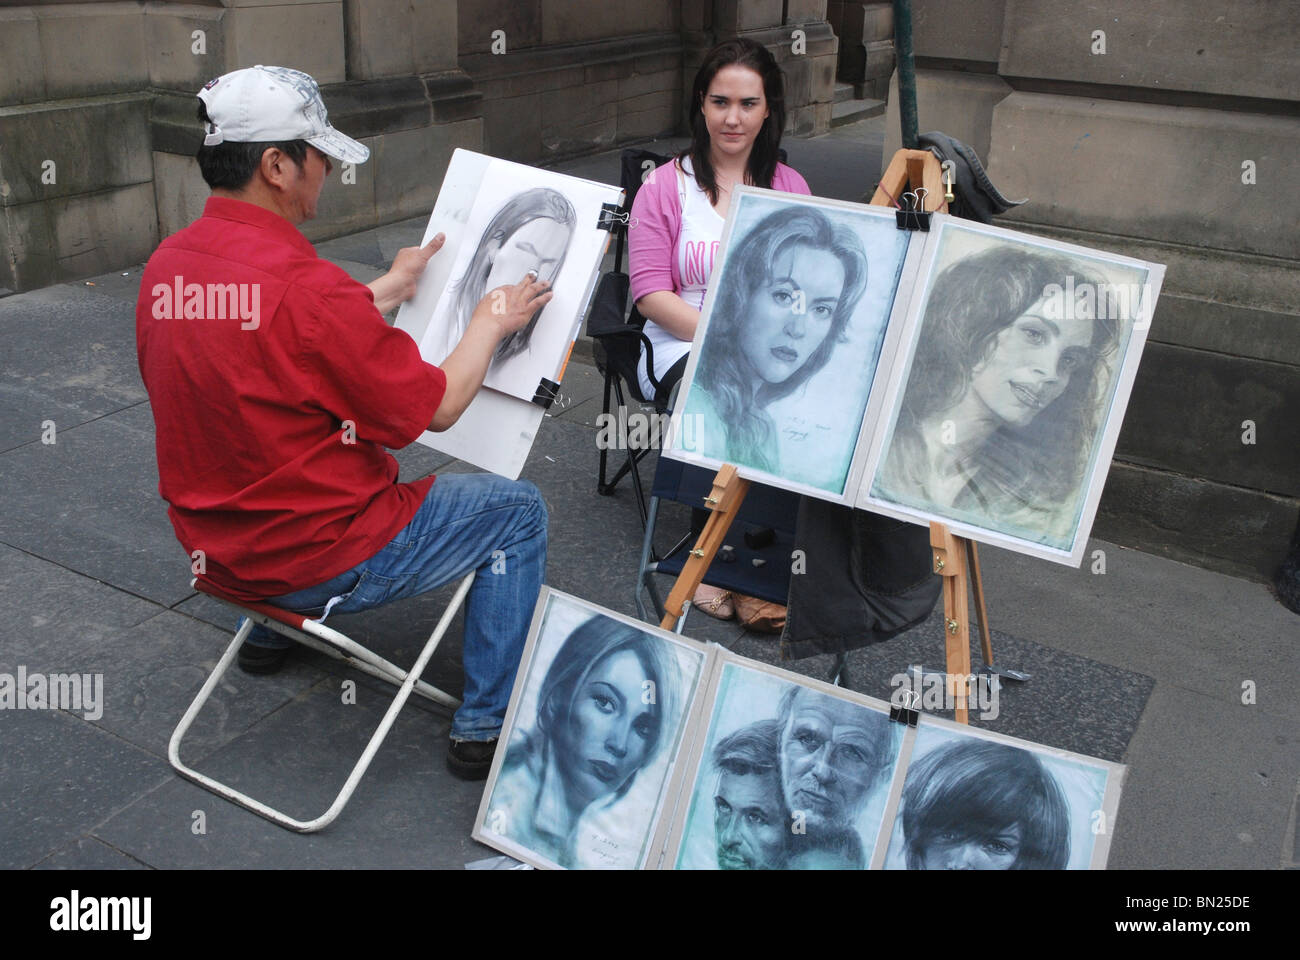 Shanice Royal and Marquita Harris the caricatures just completed by sketch  artist Ben Bloss in the milelong 16th Street pedestrian mall in downtown  Denver Colorado Marquita Harris also holds the sketch of